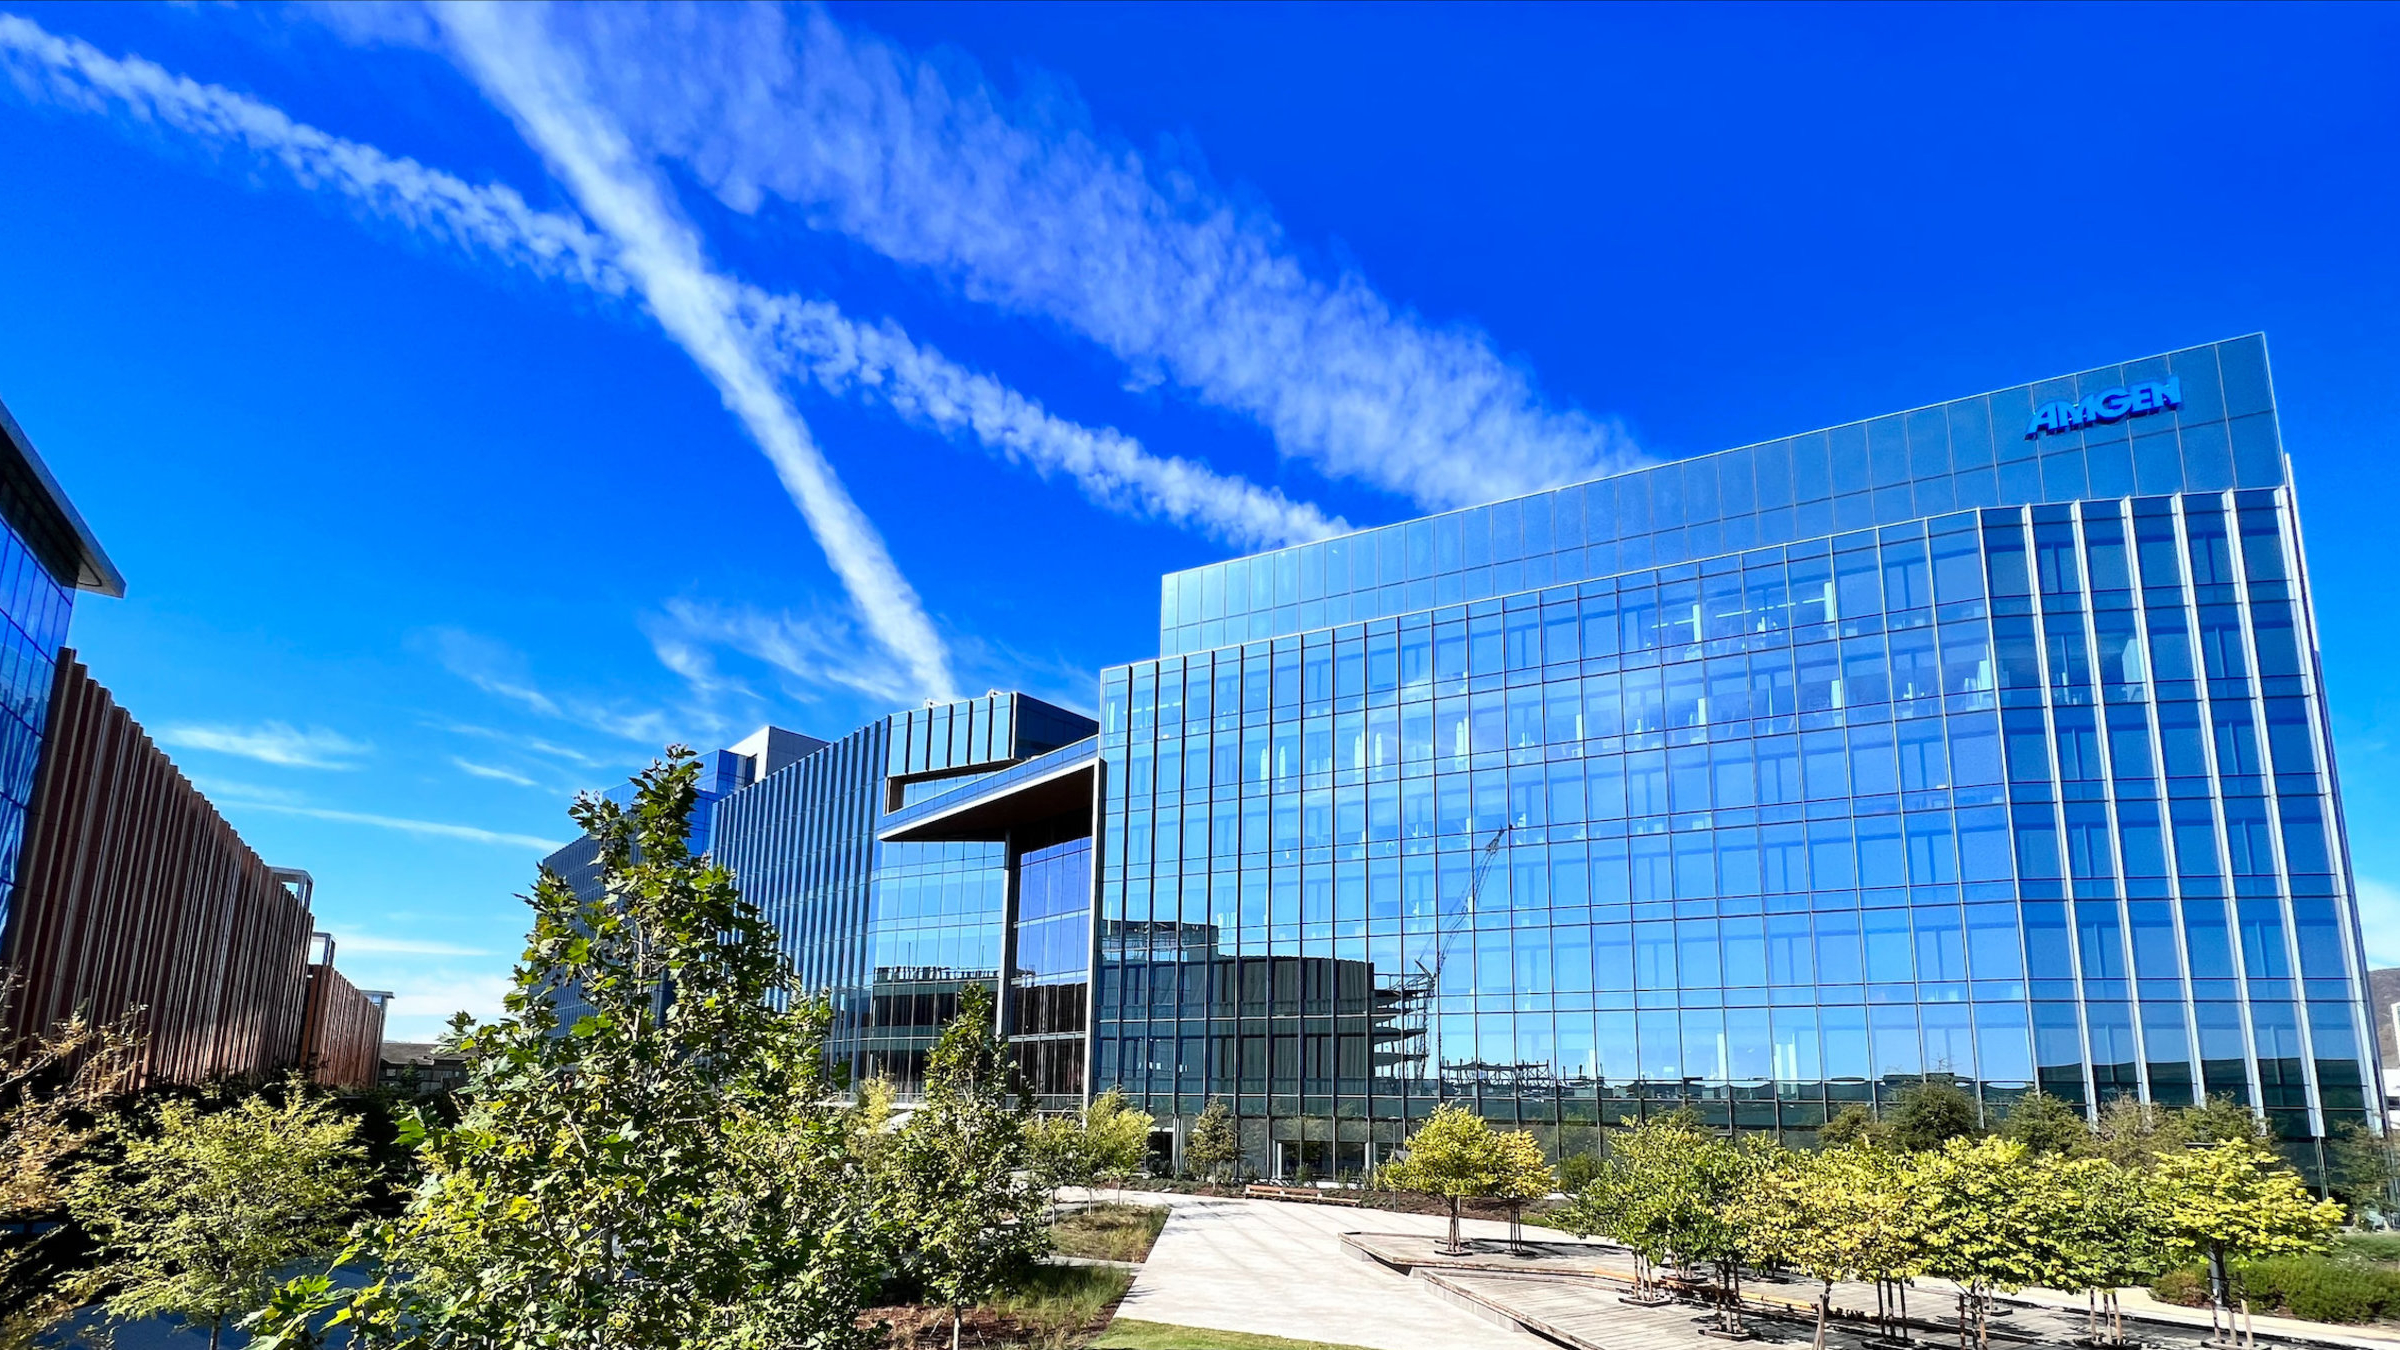 R&D acceleration: Amgen opens its second largest research site, with lab and office space for 650 staff